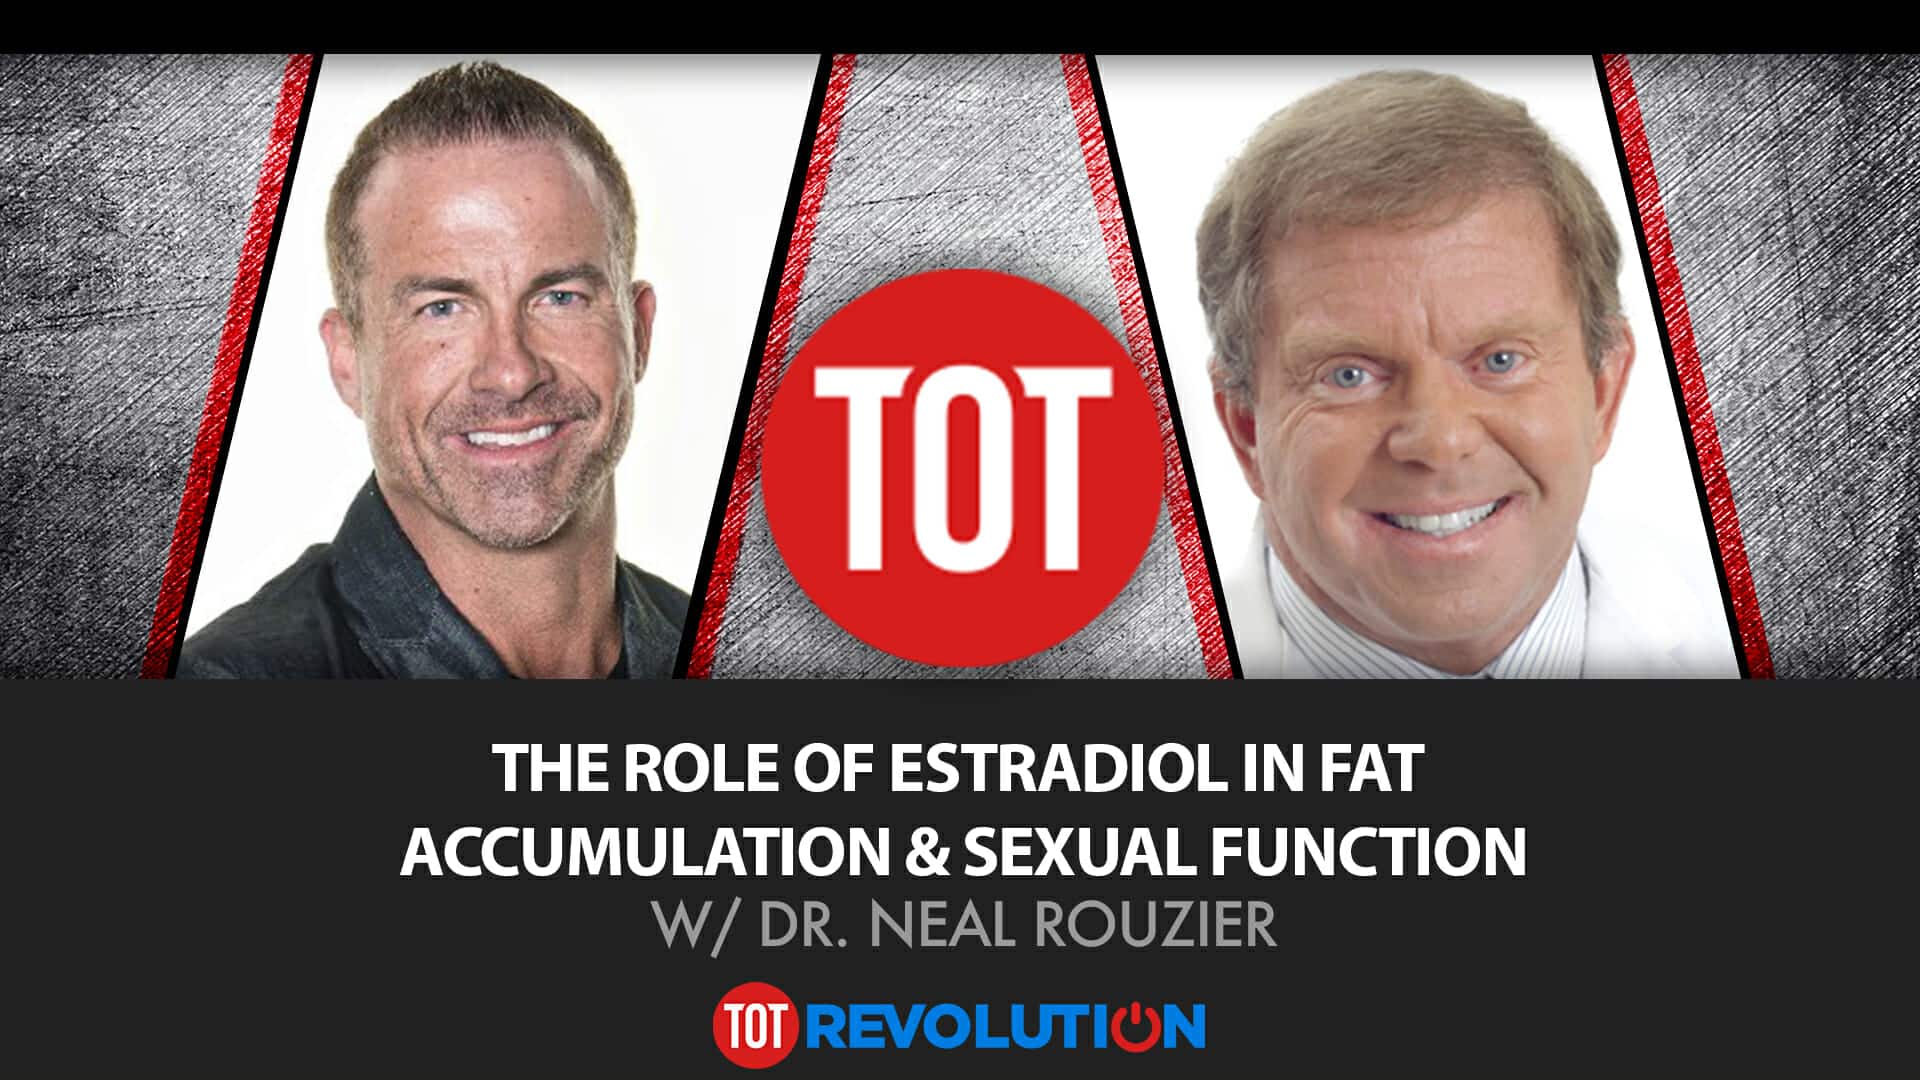 The Role of Estradiol in Fat Accumulation & Sexual Function w/Dr. Neal Rouzier